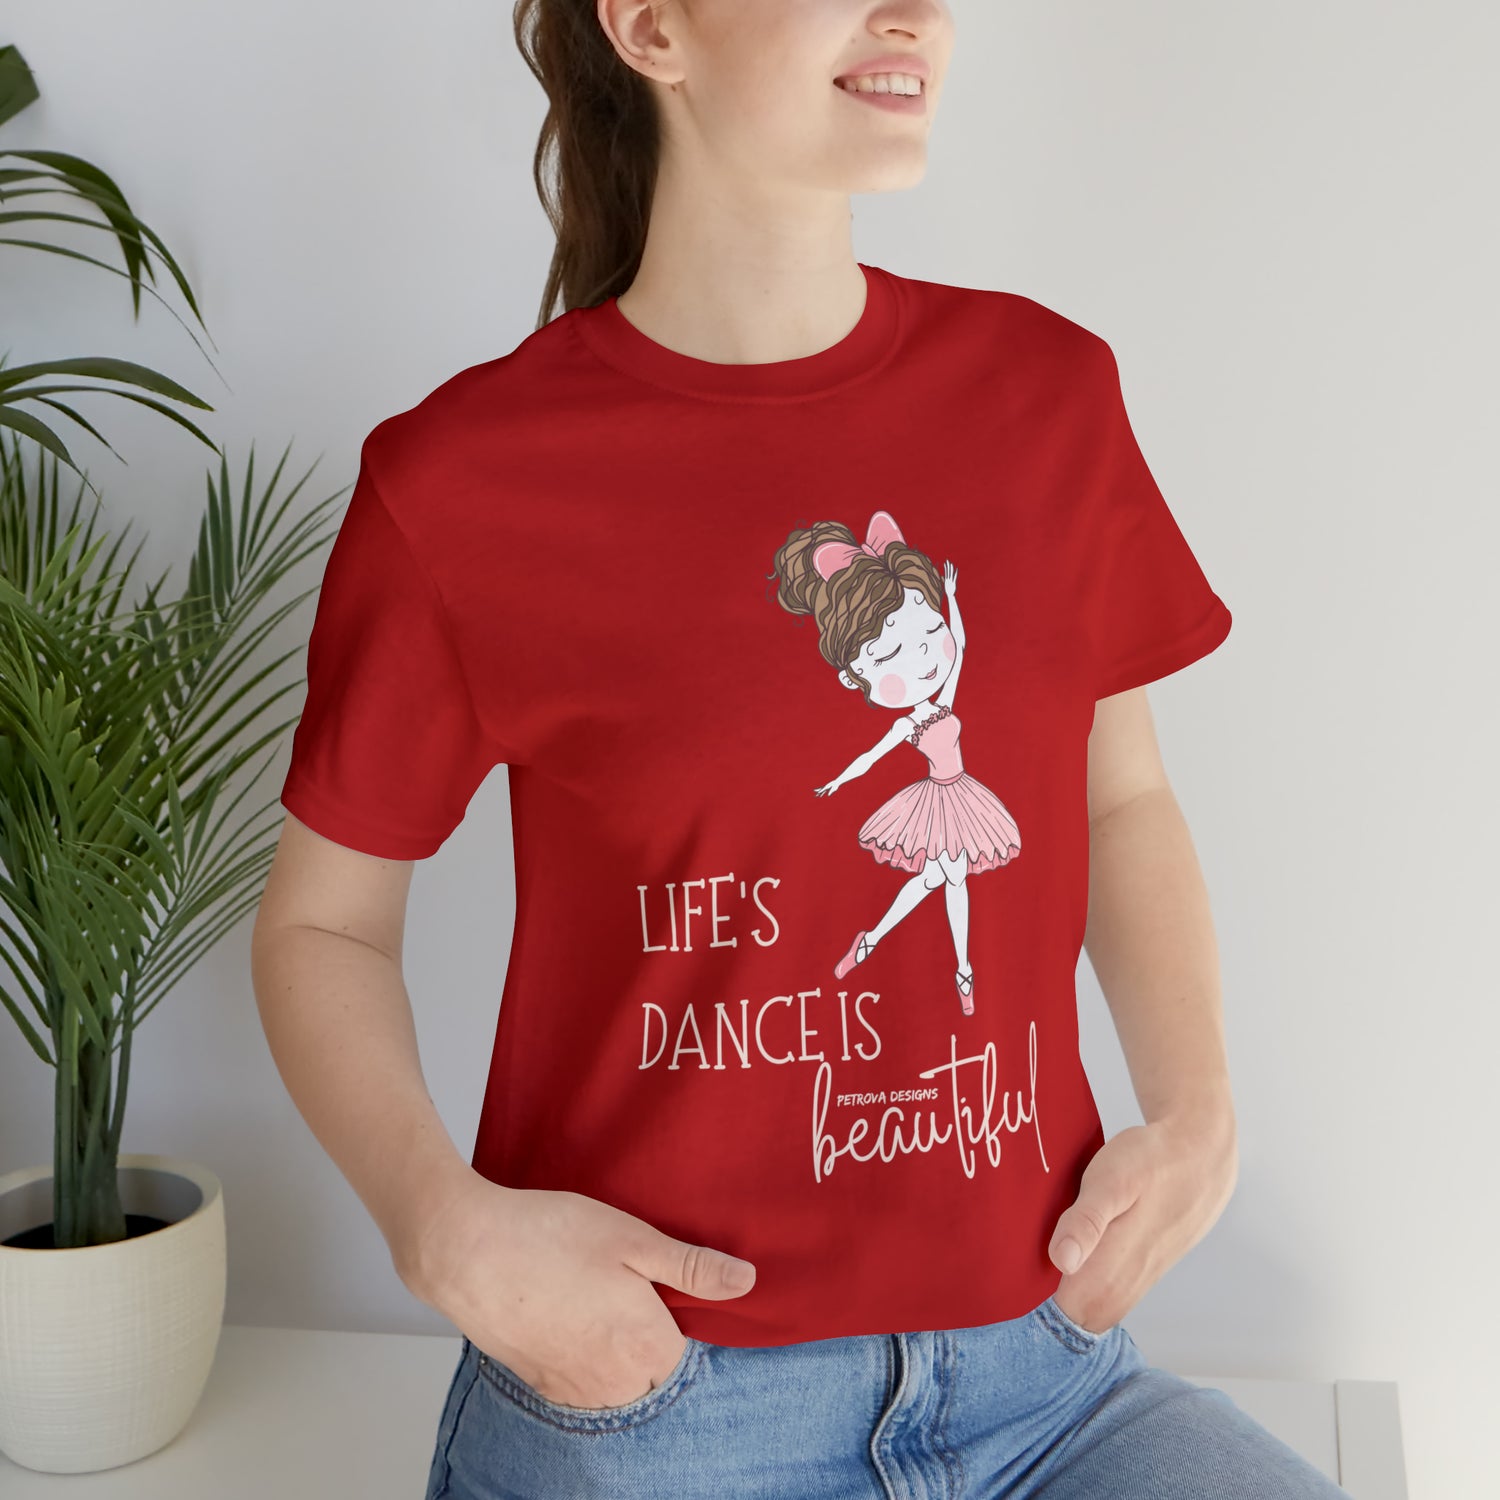 Red T-Shirt Tshirt Design Gift for Friend and Family Short Sleeved Shirt Petrova Designs